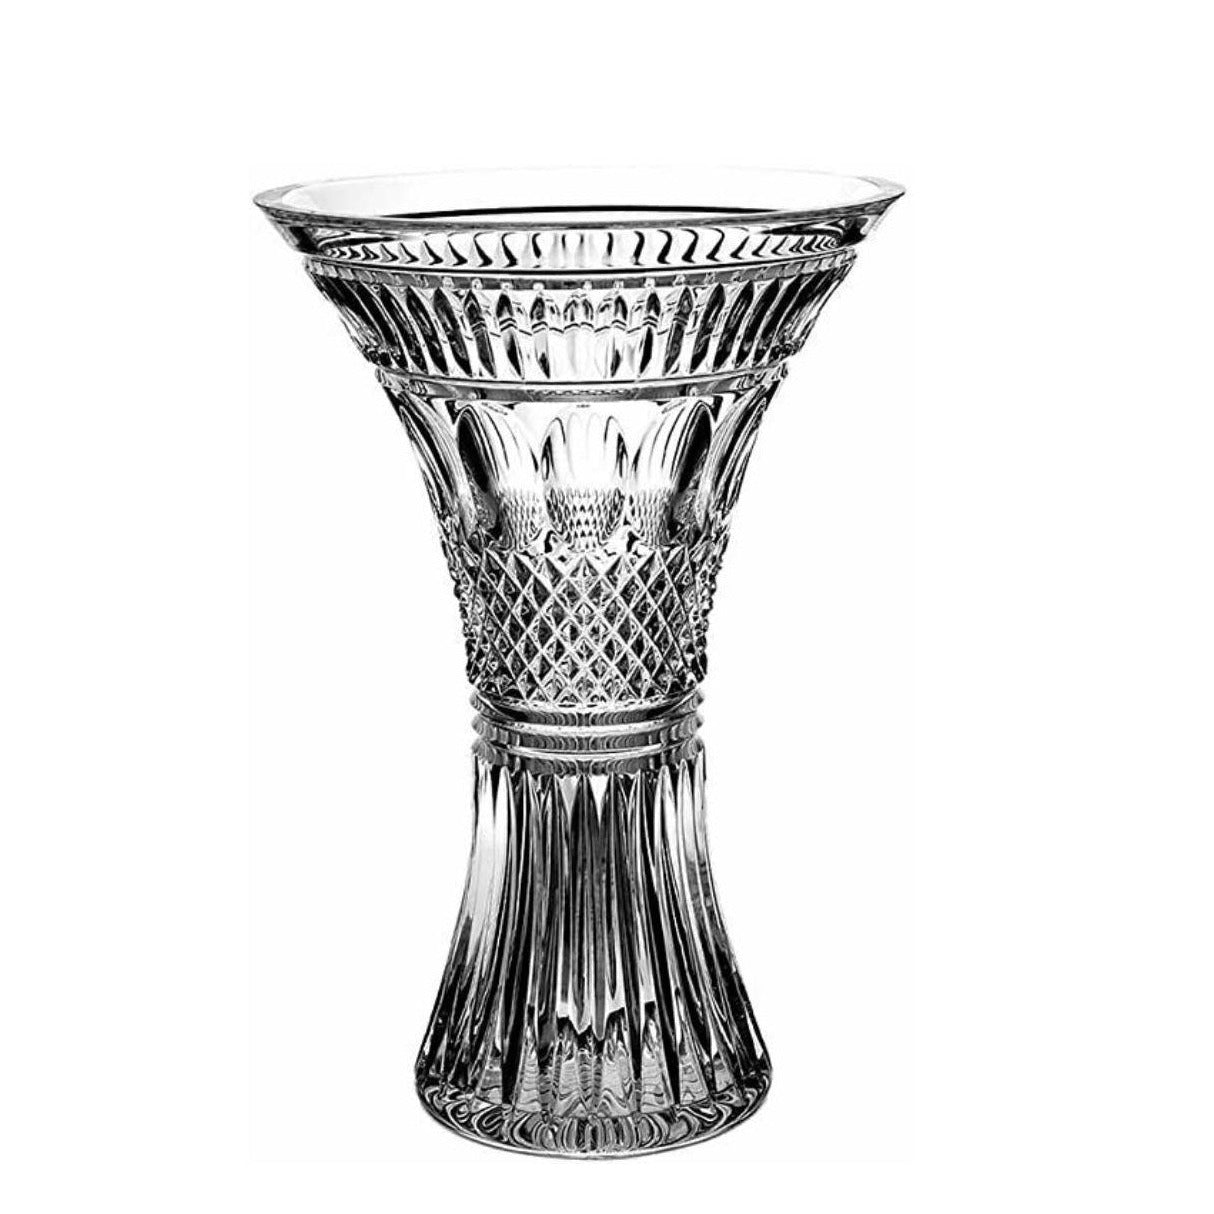 Waterford Crystal Colleen Vase Flared 12 Inch  Famously known for its distinctive olive cuts, Colleen is one of Waterford's most iconic patterns demonstrating effortless beauty. First introduced in 1953, the Colleen pattern brings a history of sophistication and radiant clarity of the Colleen 31cm flared vase, which truly transforms any floral arrangement.